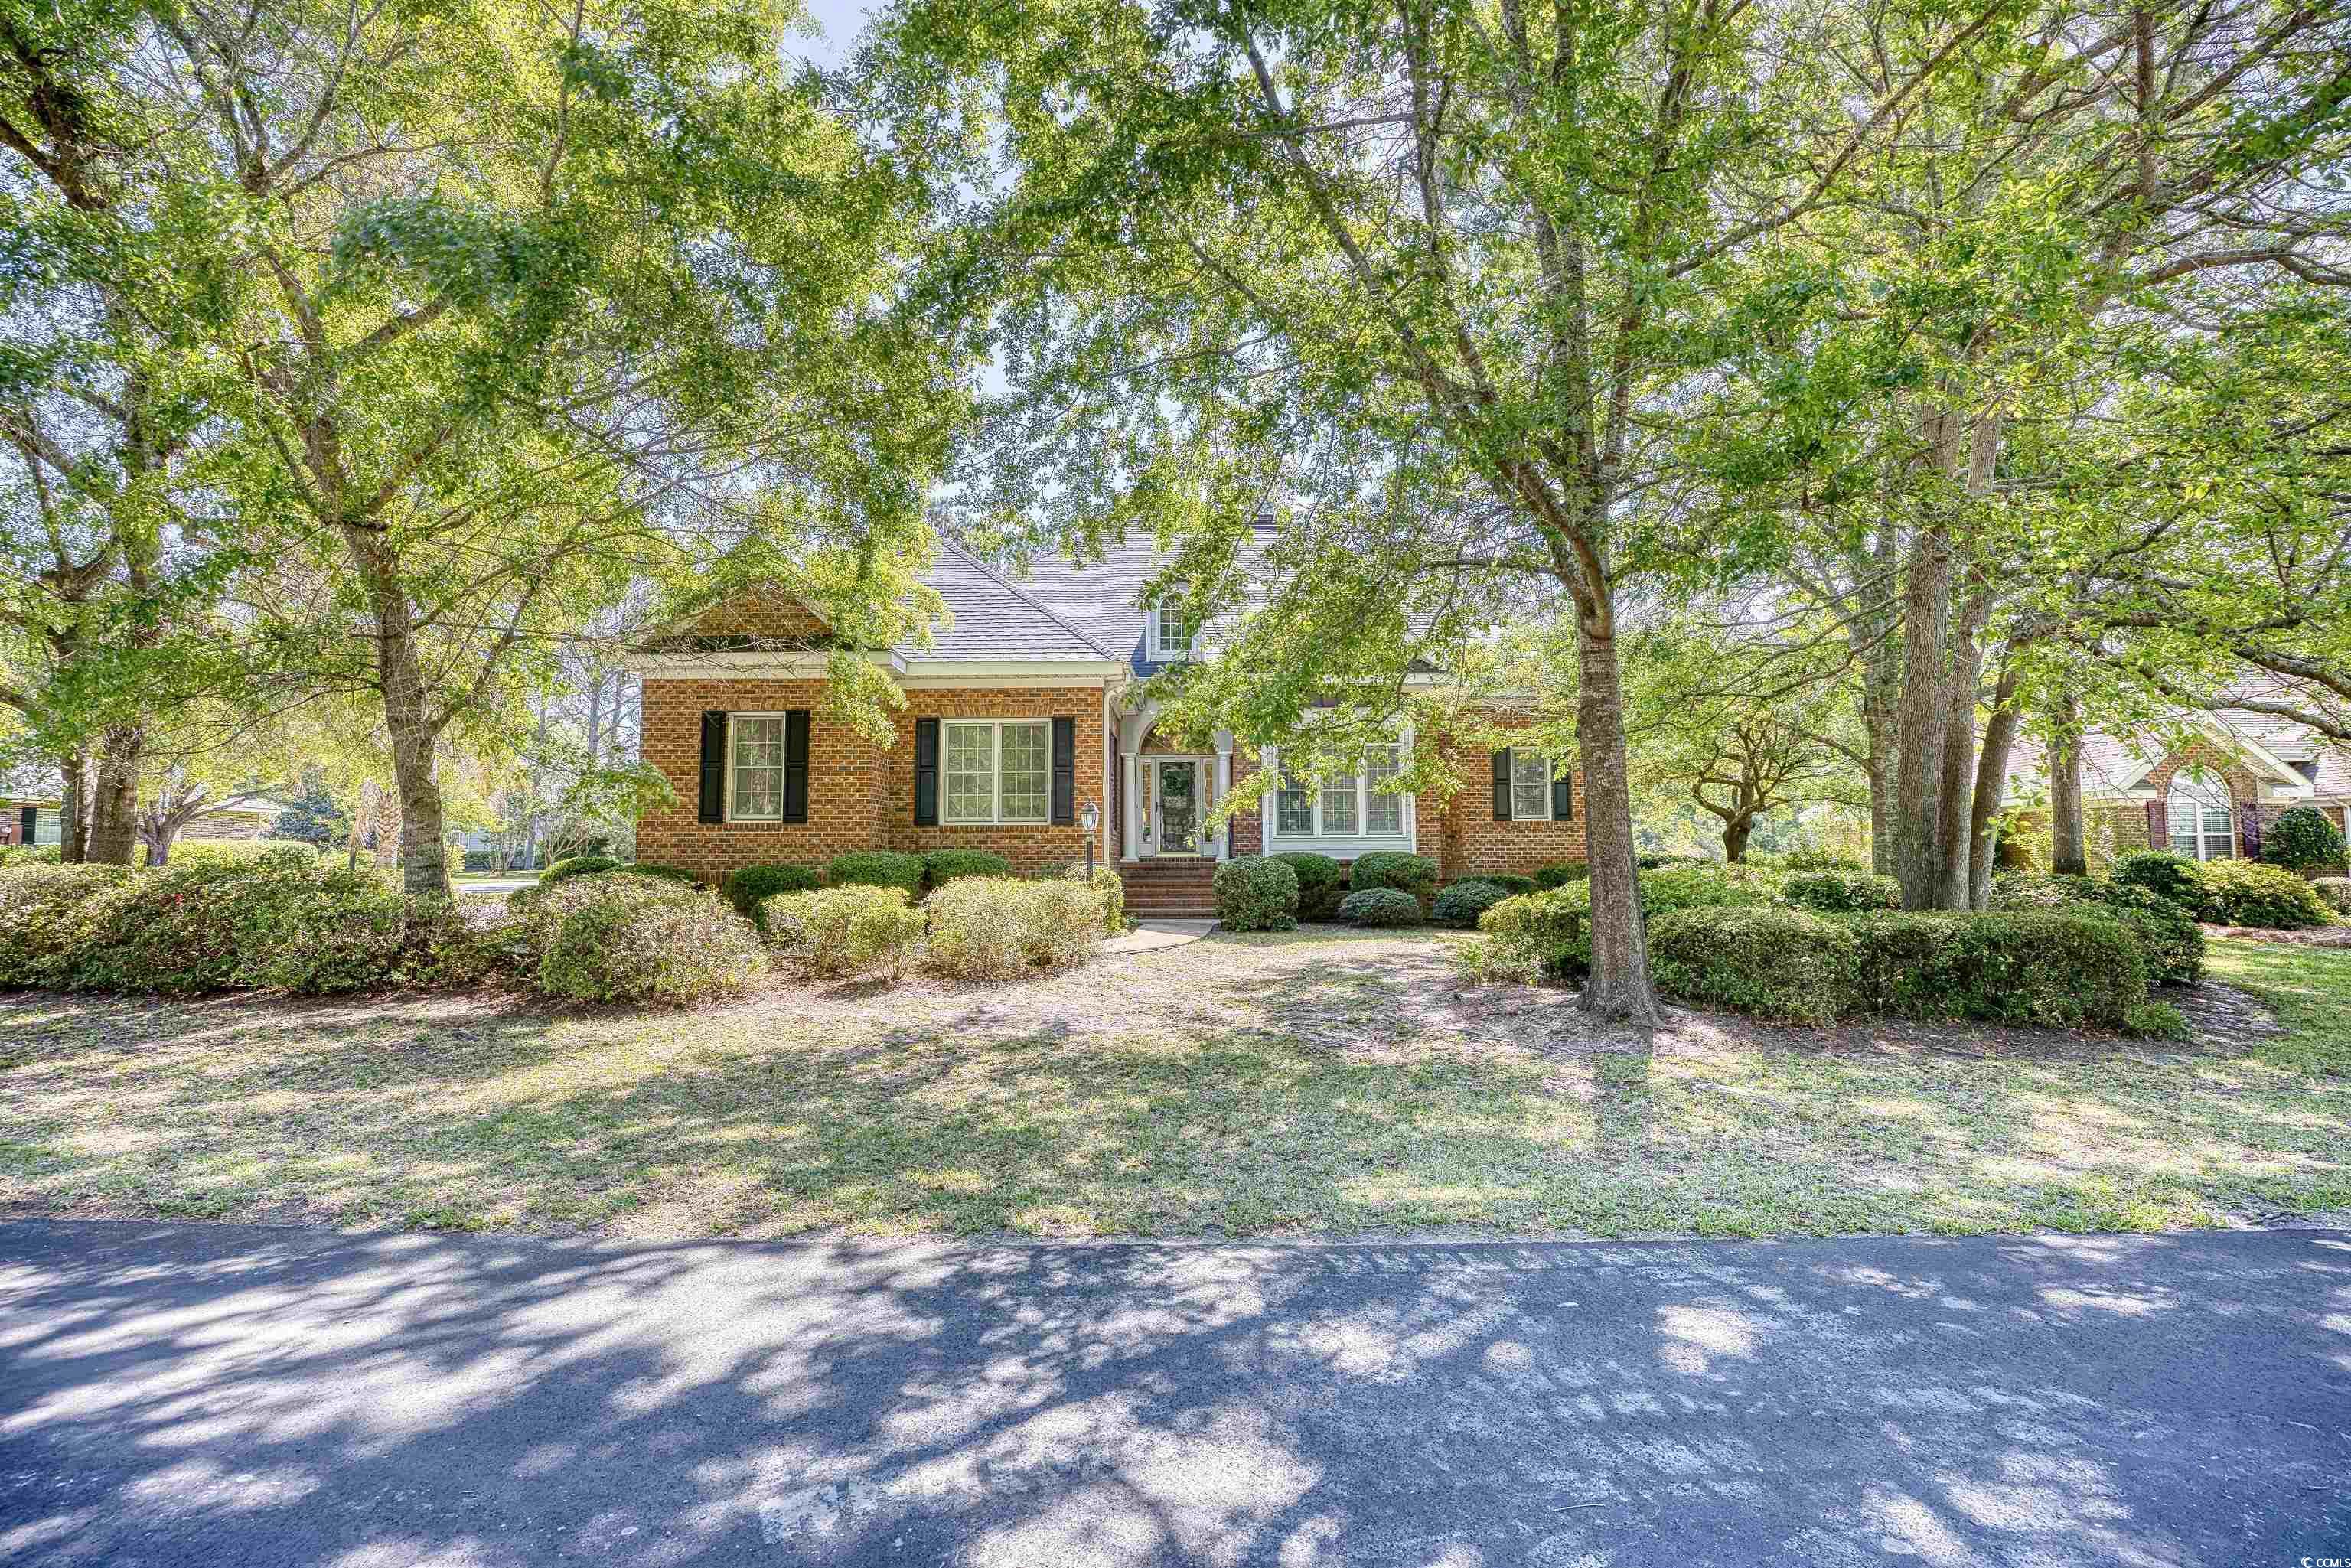 welcome to the sought-after neighborhood of river club with full access to litchfield by the sea. this all-brick home sits on a corner lot over a 1/3 of an acre landscaped by oak trees and azaleas cascading in front of the home that blooms in the spring. you will also notice as you walk to the front door across the street is a view of the pond and golf course. upon entering the home you'll fall in love with the tall ceilings and natural light, and immediate views of the wooded, private back yard, which has a pond view to the right side of yard. enjoy a late day beverage on the screened in porch or on the deck. the formal dining room gives you more space for holiday gatherings, and the living room directly in front of you boasts a fireplace for those cozy winter nights. so much room! and the kitchen is extremely open and spacious with natural lighting and a large family room/sitting area for more entertainment. lots of cabinet space, a walk-in pantry and granite countertops make this a chef's dream kitchen. the other side of the home has three bedrooms. the spacious master suite is on the first floor and brings in the morning sun, with a walk-in closet and a full bath. there's an additional linen closet in the hallway. and travelling down the hall are the other two bedrooms and a shared bath. the fourth bedroom is located upstairs with a full bath and closet. the walk-in attic gives you additional storage for all those extra holiday decorations! this is truly a well-built home that has shared many, many family memories, and you can make them yours too. this home must be seen to be appreciated--schedule your showing today! thank you.  river club is a gated golf course community with a private pool and access to litchfield by the sea. there is a private pool with restrooms, tennis courts, and pickle ball courts. just minutes to beautiful beaches, marina, shopping, world class golf courses, state park and more. only 20 miles south of myrtle beach and just one hour north of historic charleston.